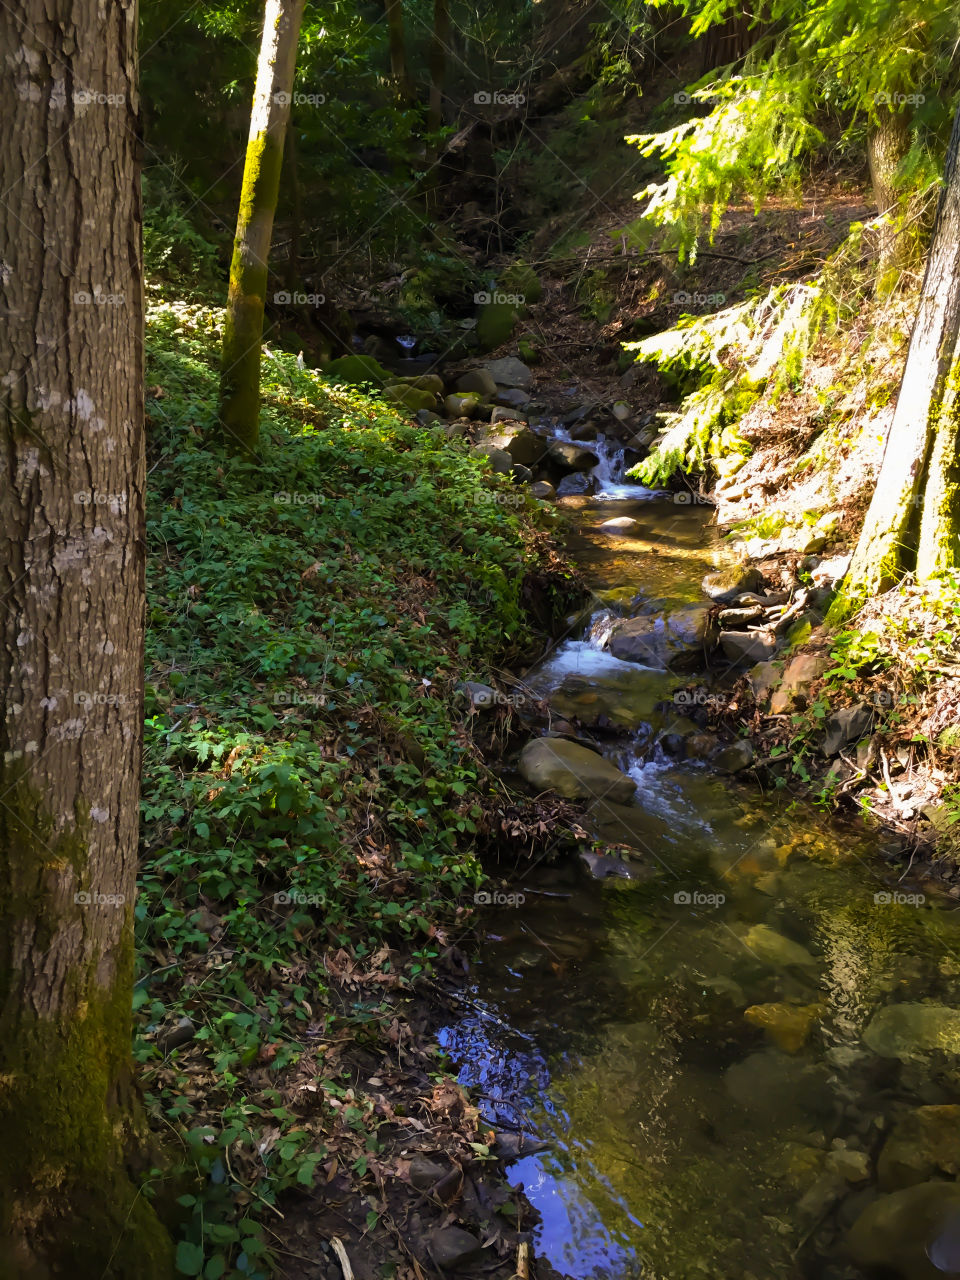 Stream flowing in wooded area, patchwork of slight and shadows.